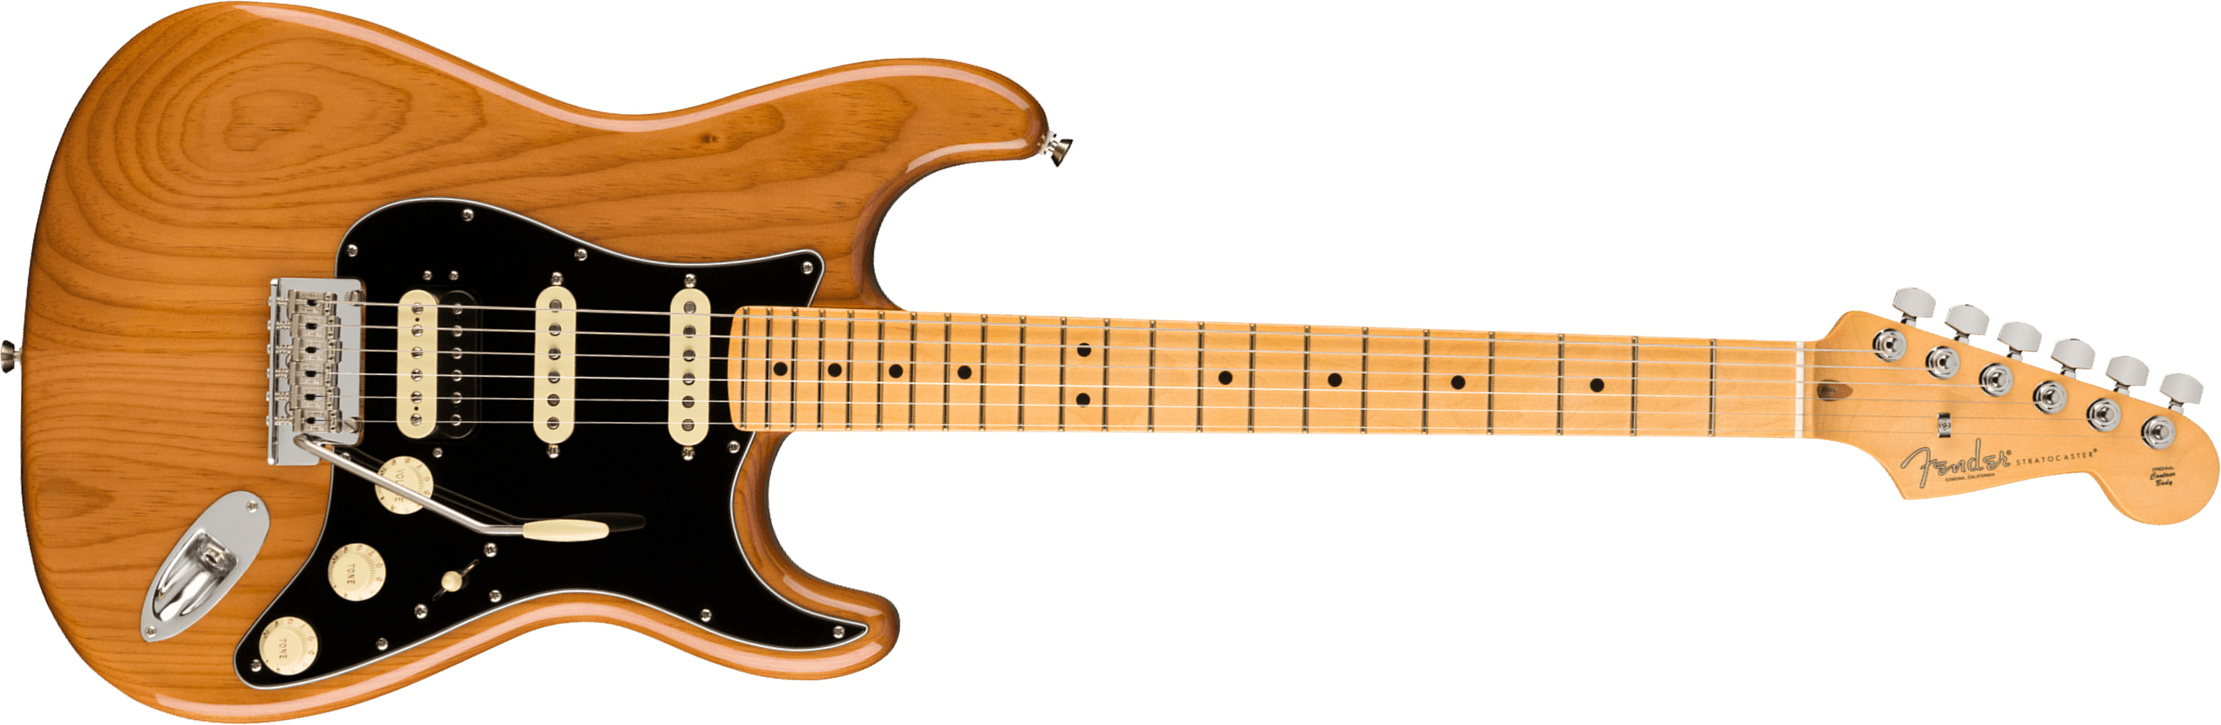 Fender Strat American Professional Ii Hss Usa Mn - Roasted Pine - Guitare Électrique Forme Str - Main picture